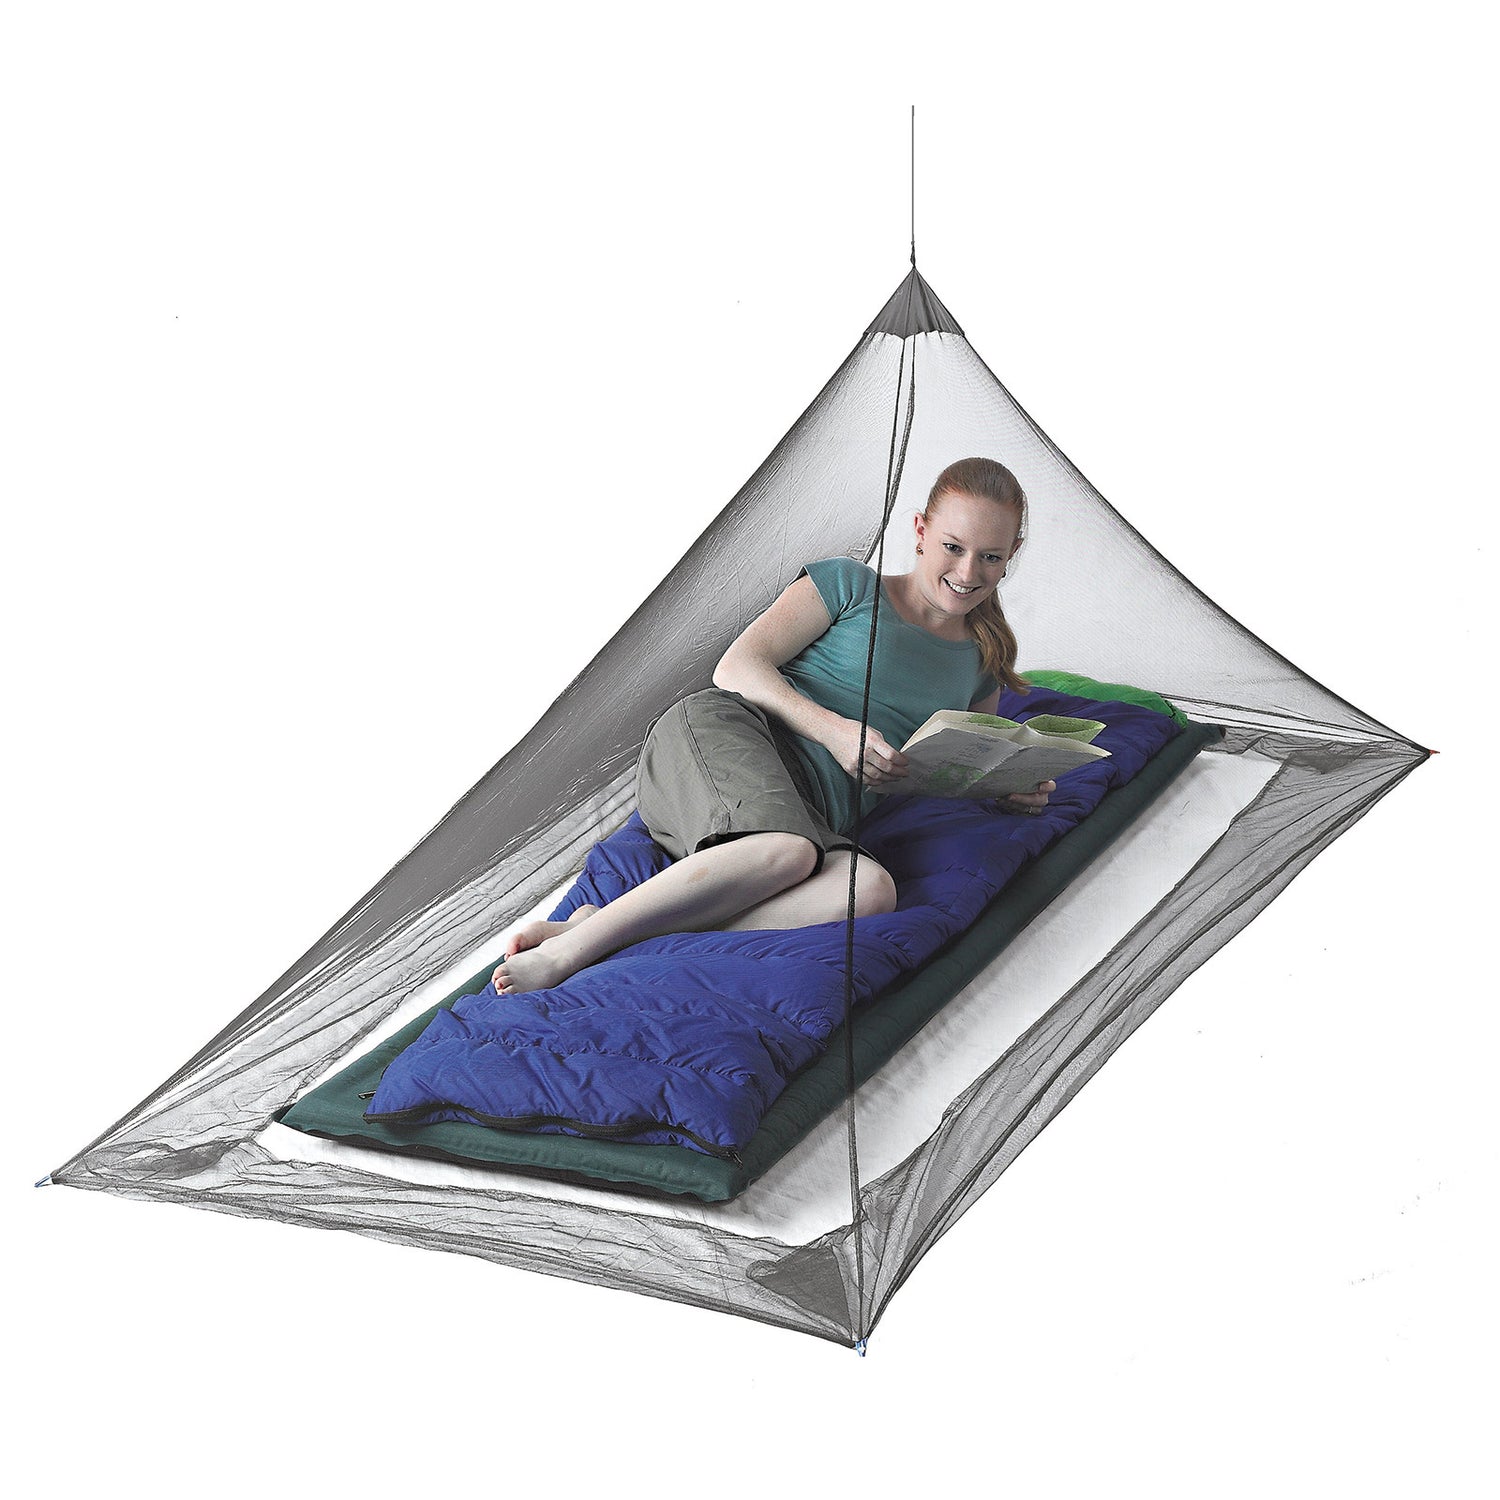 Camping Net White Mesh Portable Square Foldable Mosquito Control